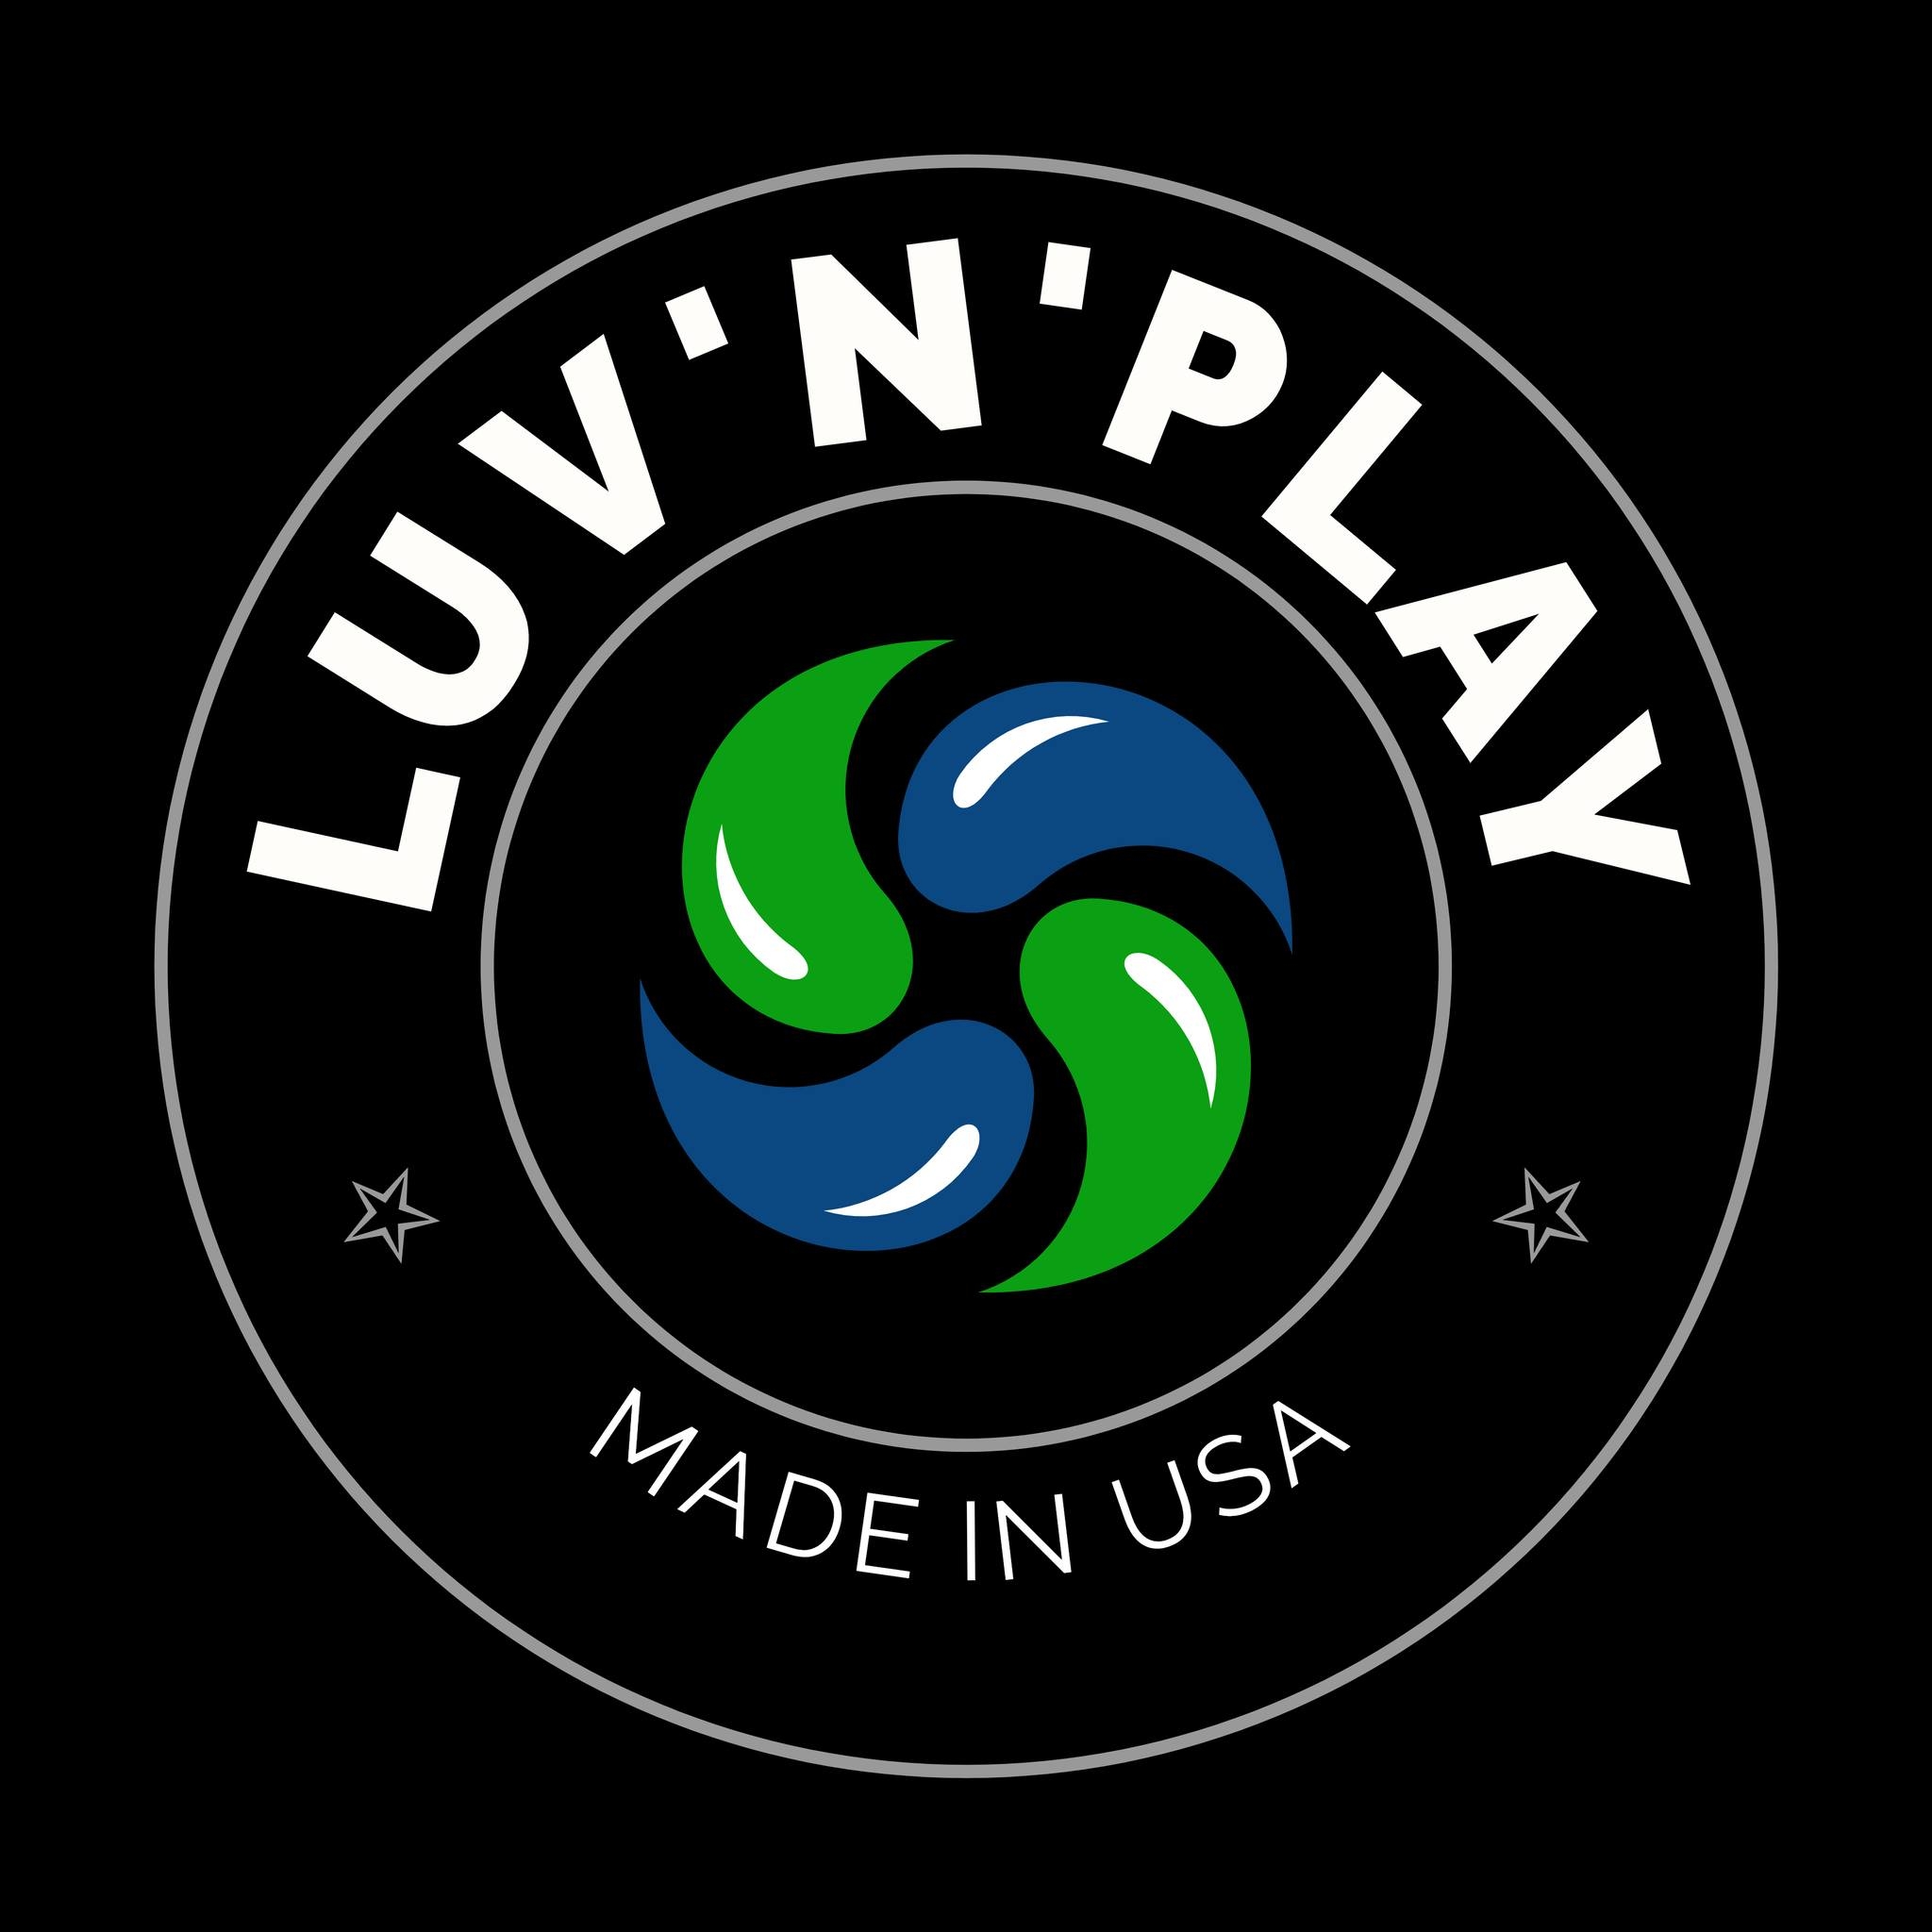 Luv 'n' Play Online Store Launches New Clothing Section with Unique Themes for Men